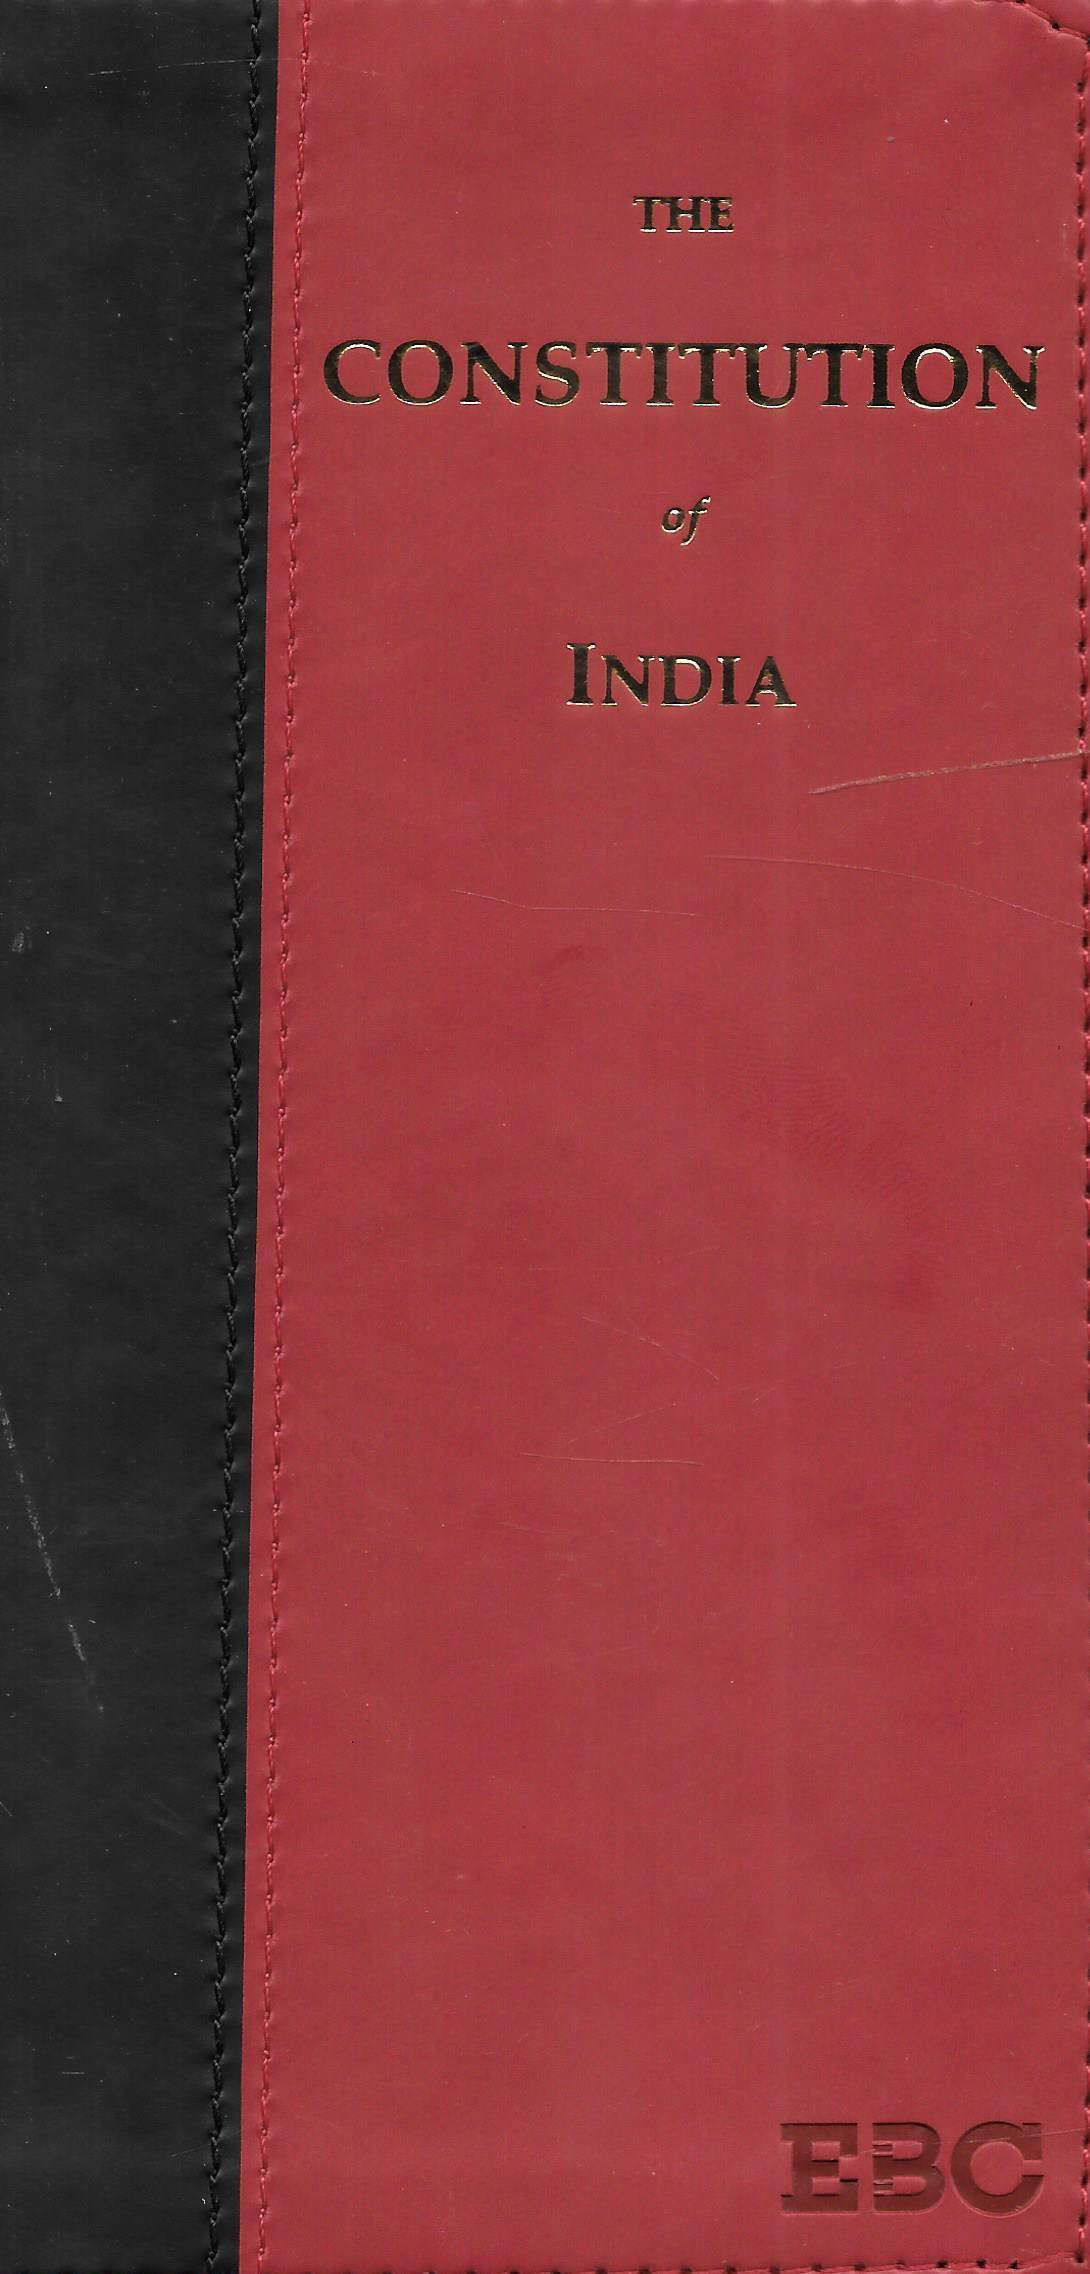 The Constitution of India - Coat Pocket Edn.